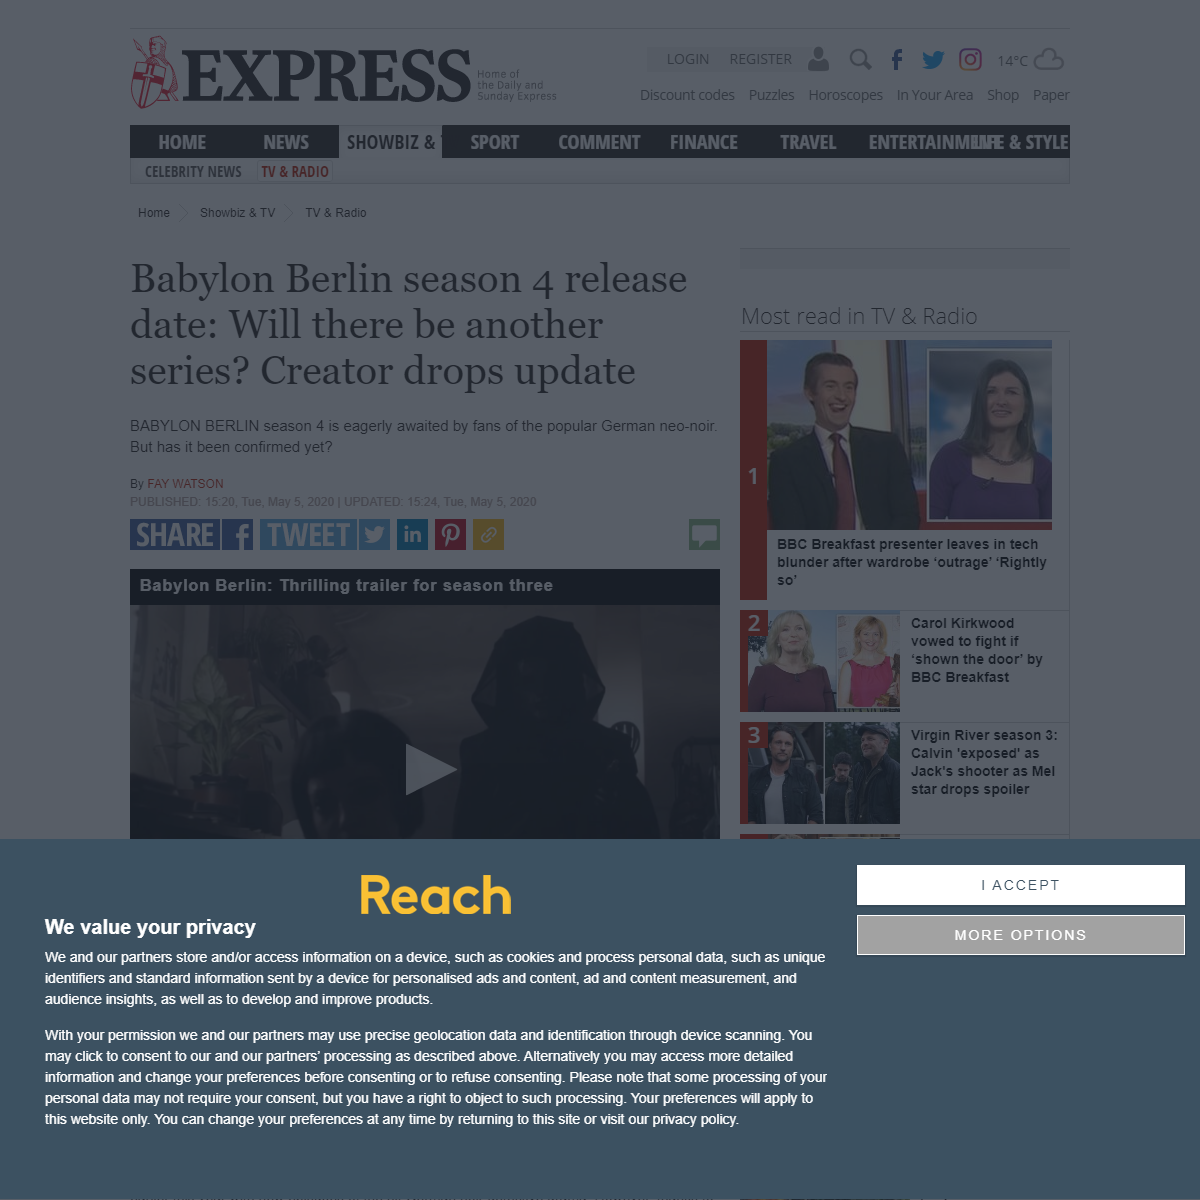 A complete backup of https://www.express.co.uk/showbiz/tv-radio/1254082/Babylon-Berlin-season-4-another-series-renewed-cancelled